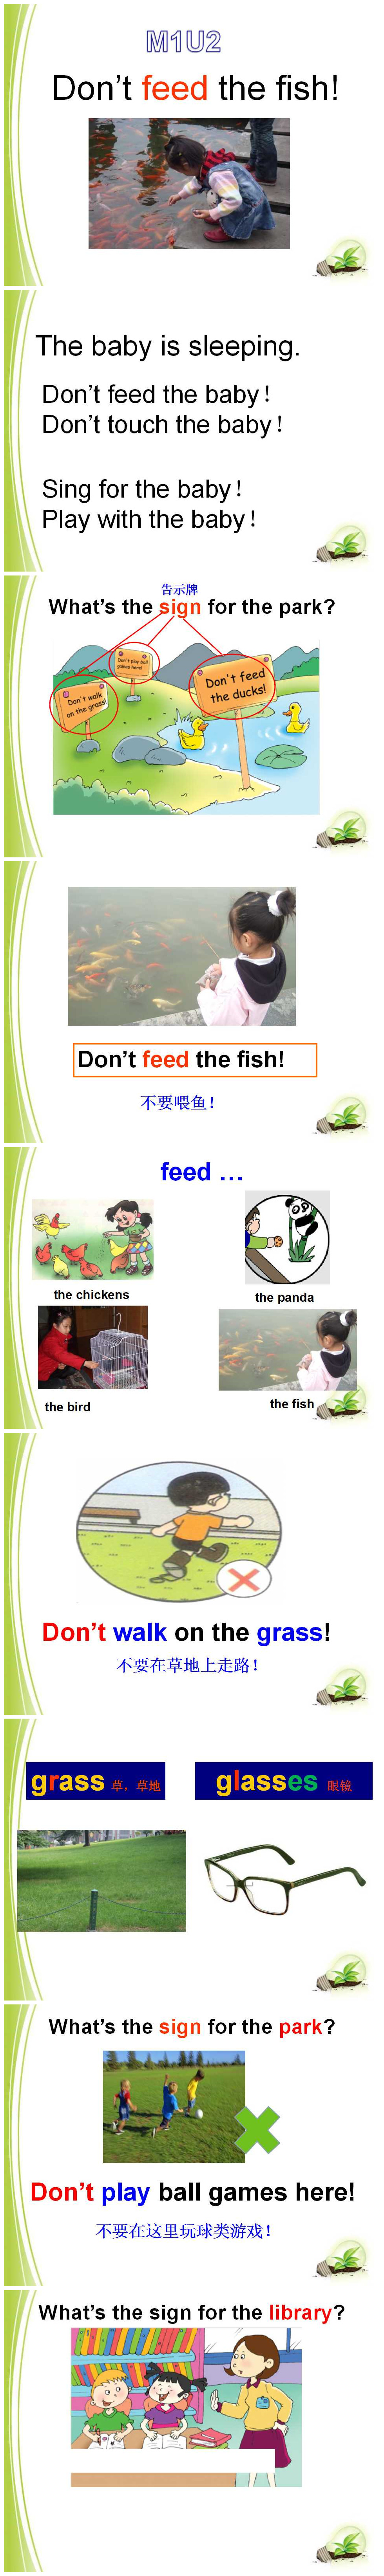 《Don't feed the fish》PPT课件3PPT课件下载